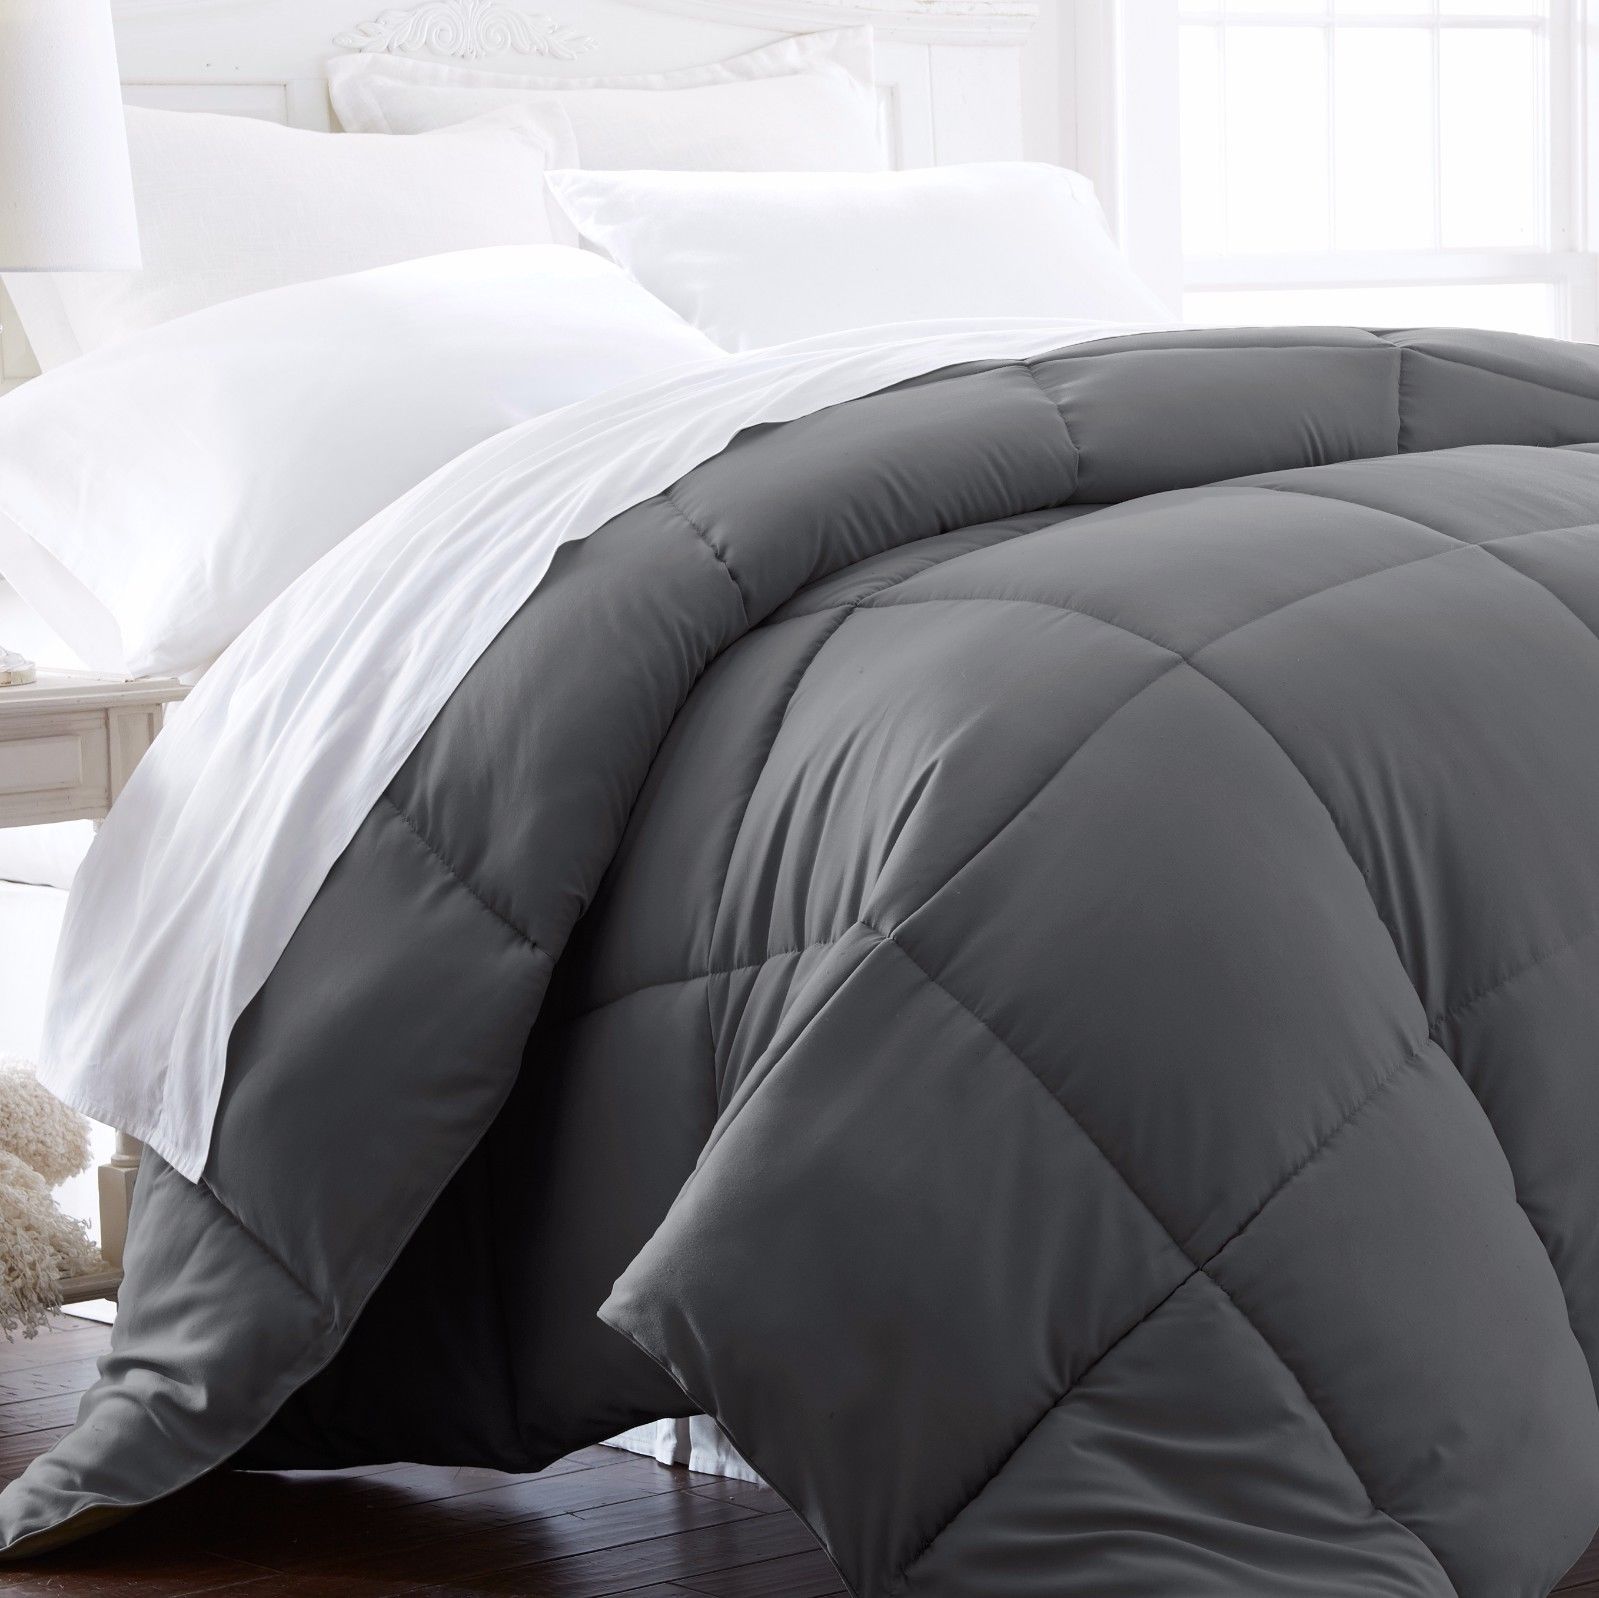 Premium goose down alternative comforters from $16, free shipping